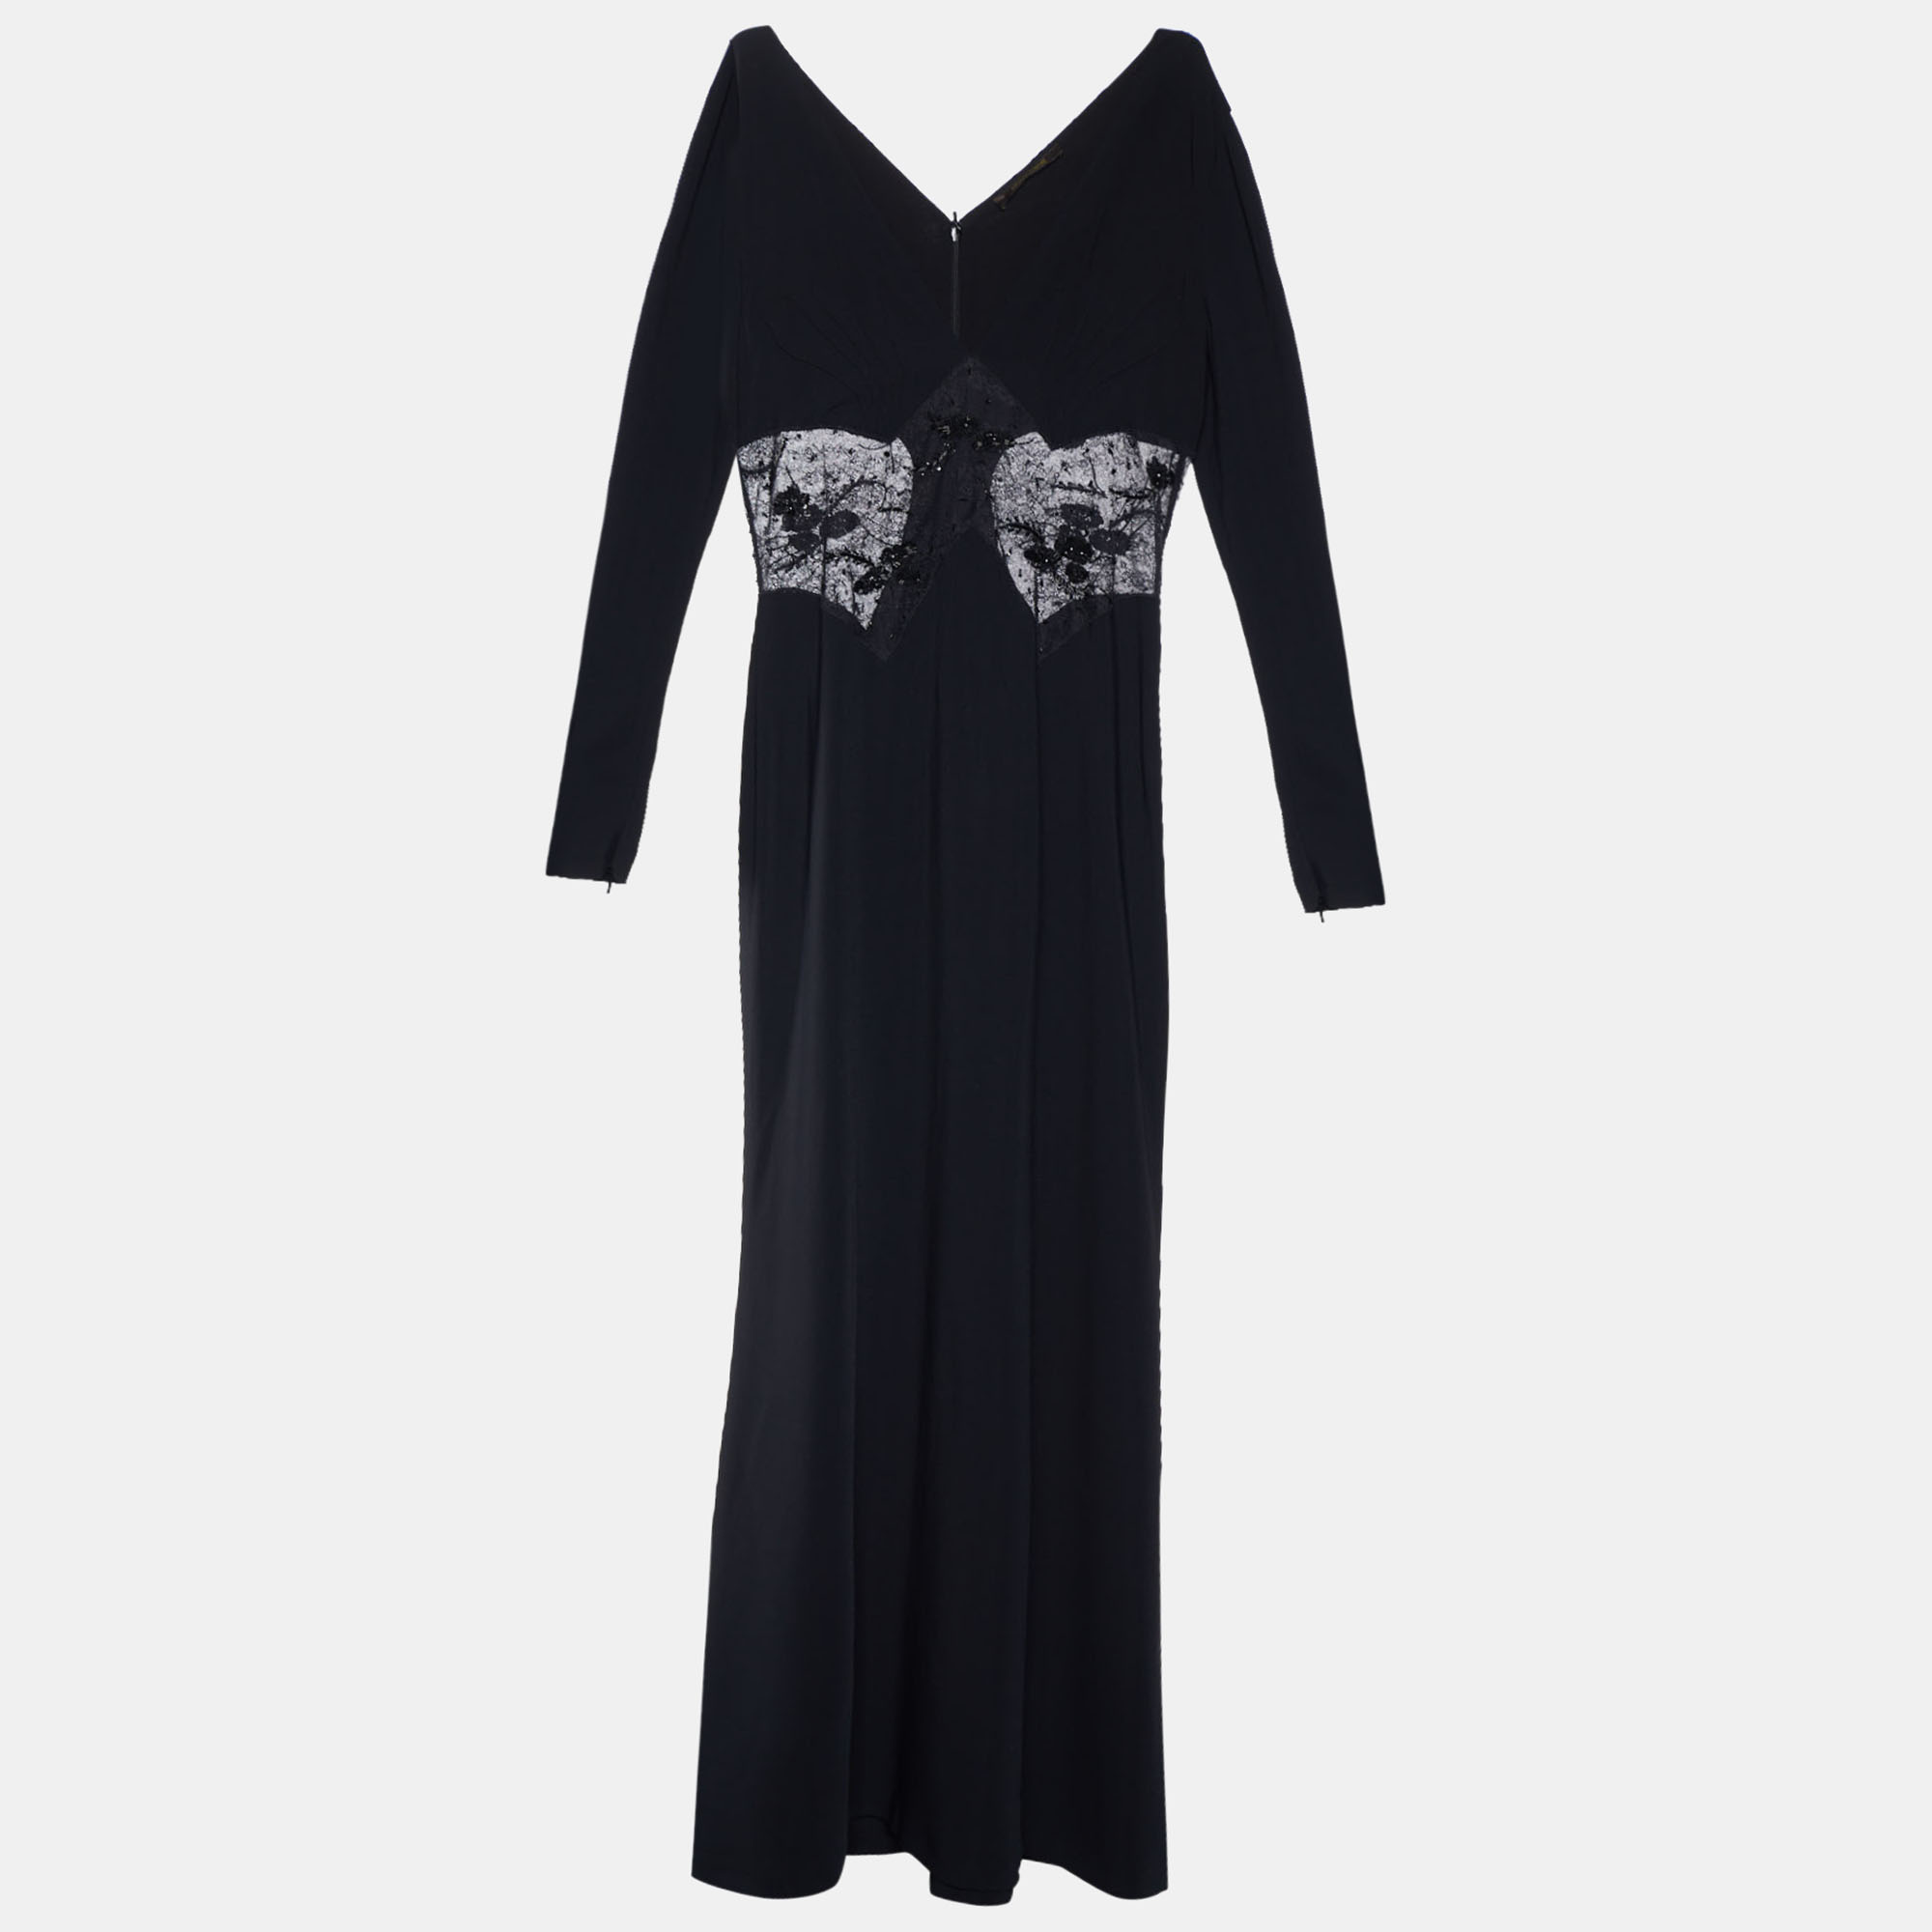 Pre-owned Roberto Cavalli Black Crepe & Embellished Lace Gown L